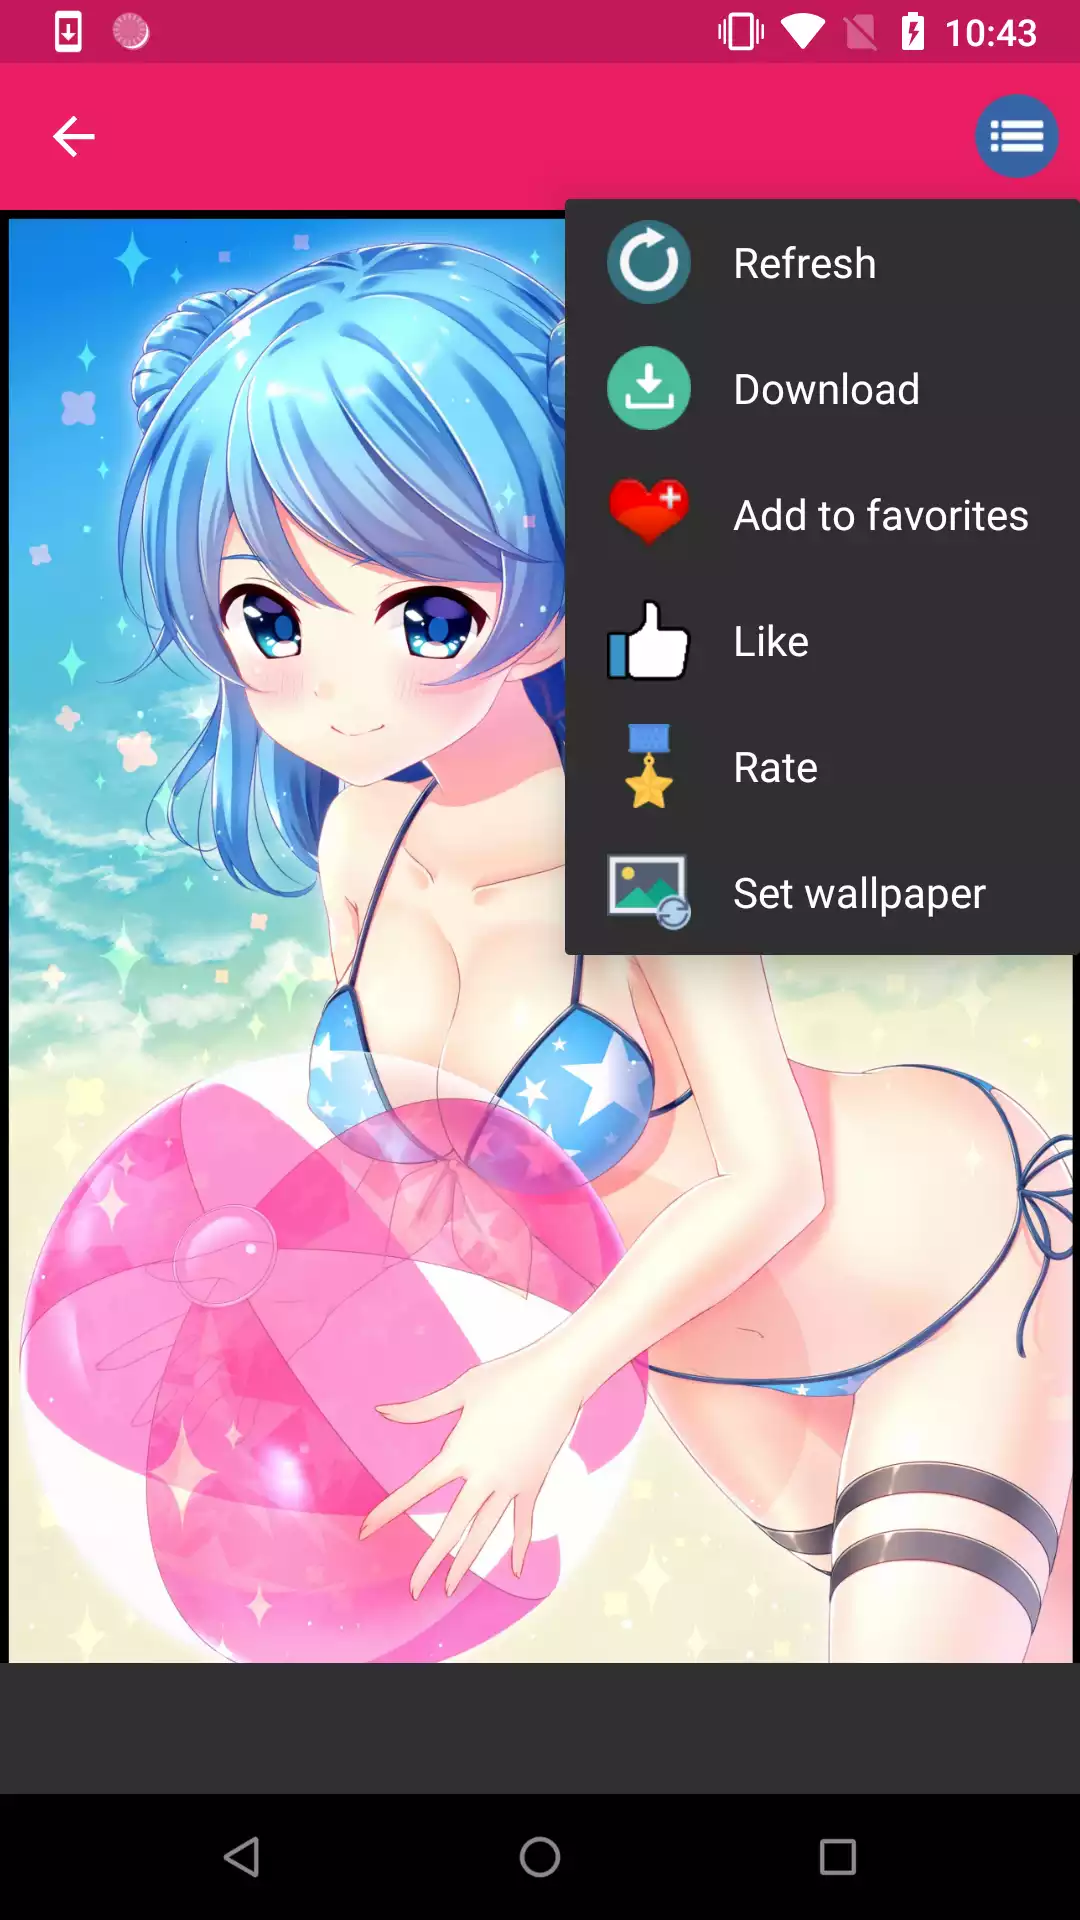 Sexy Anime Girls Wallpapers sissy,backgrounds,henti,app,panties,porn,erotic,apps,puzzle,girls,and,pornstarphoto,star,pics,apk,topless,sexy,wallpaper,offline,hot,anime,hentai,wallpapers,download,android